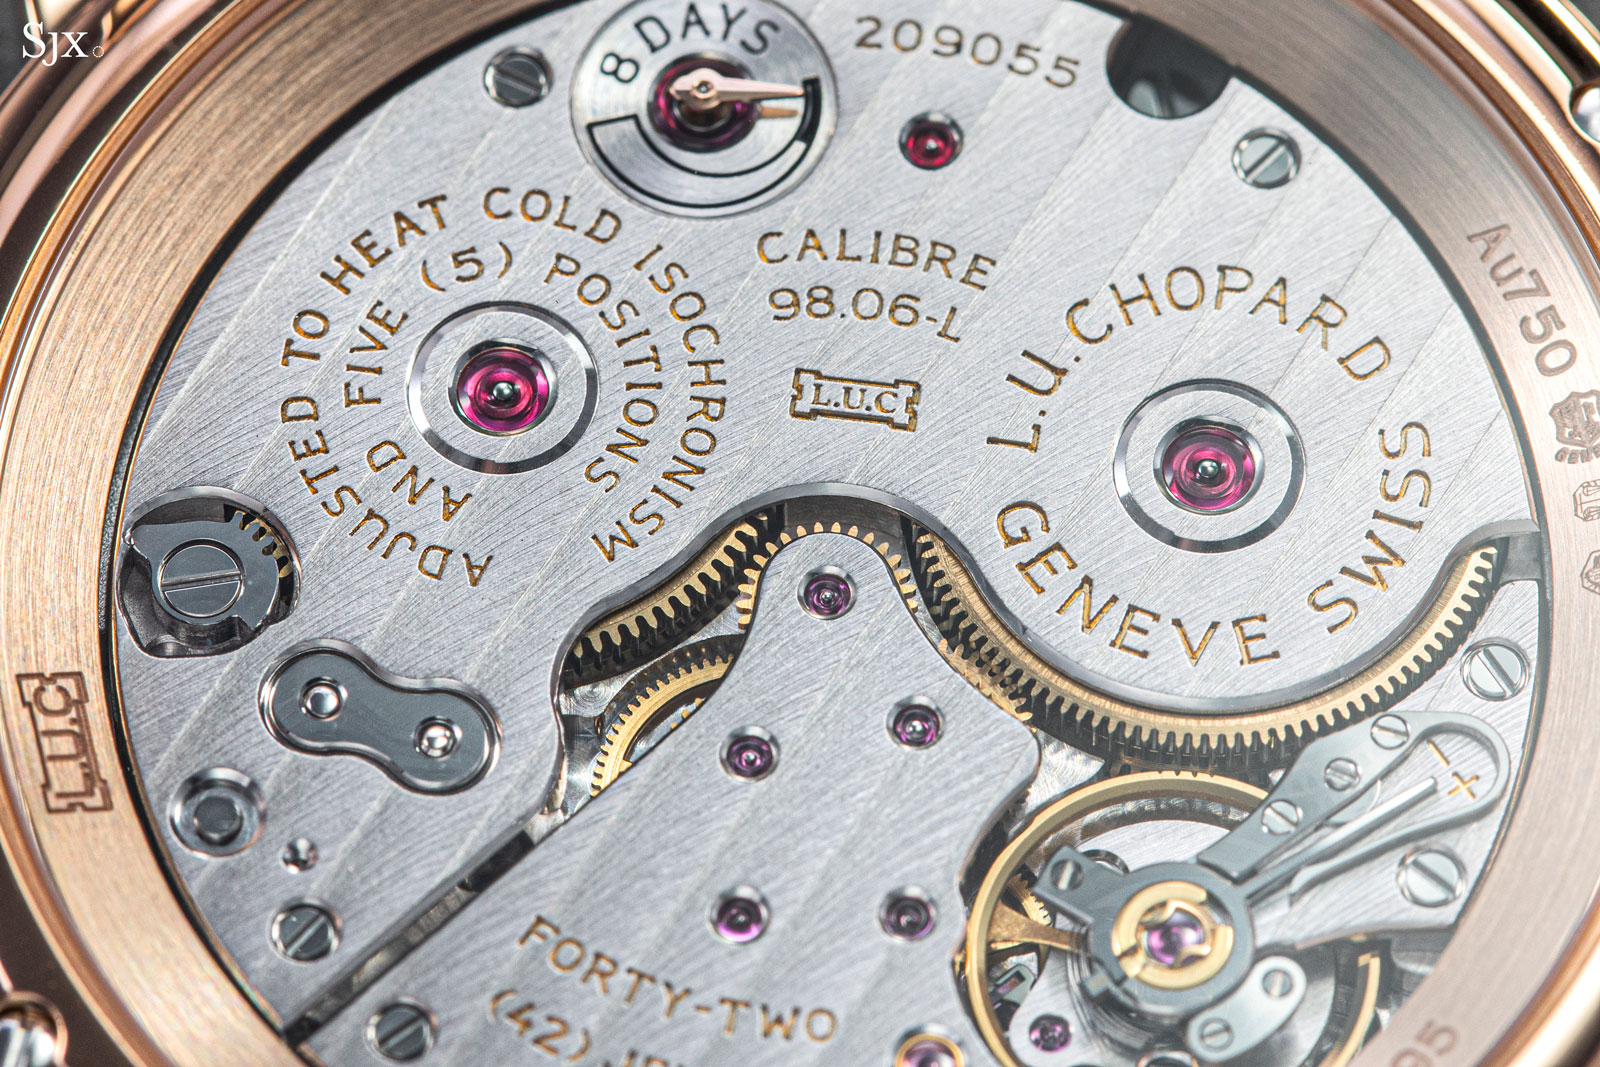 Hands on review of the Chopard LUC Quattro Spirit 25